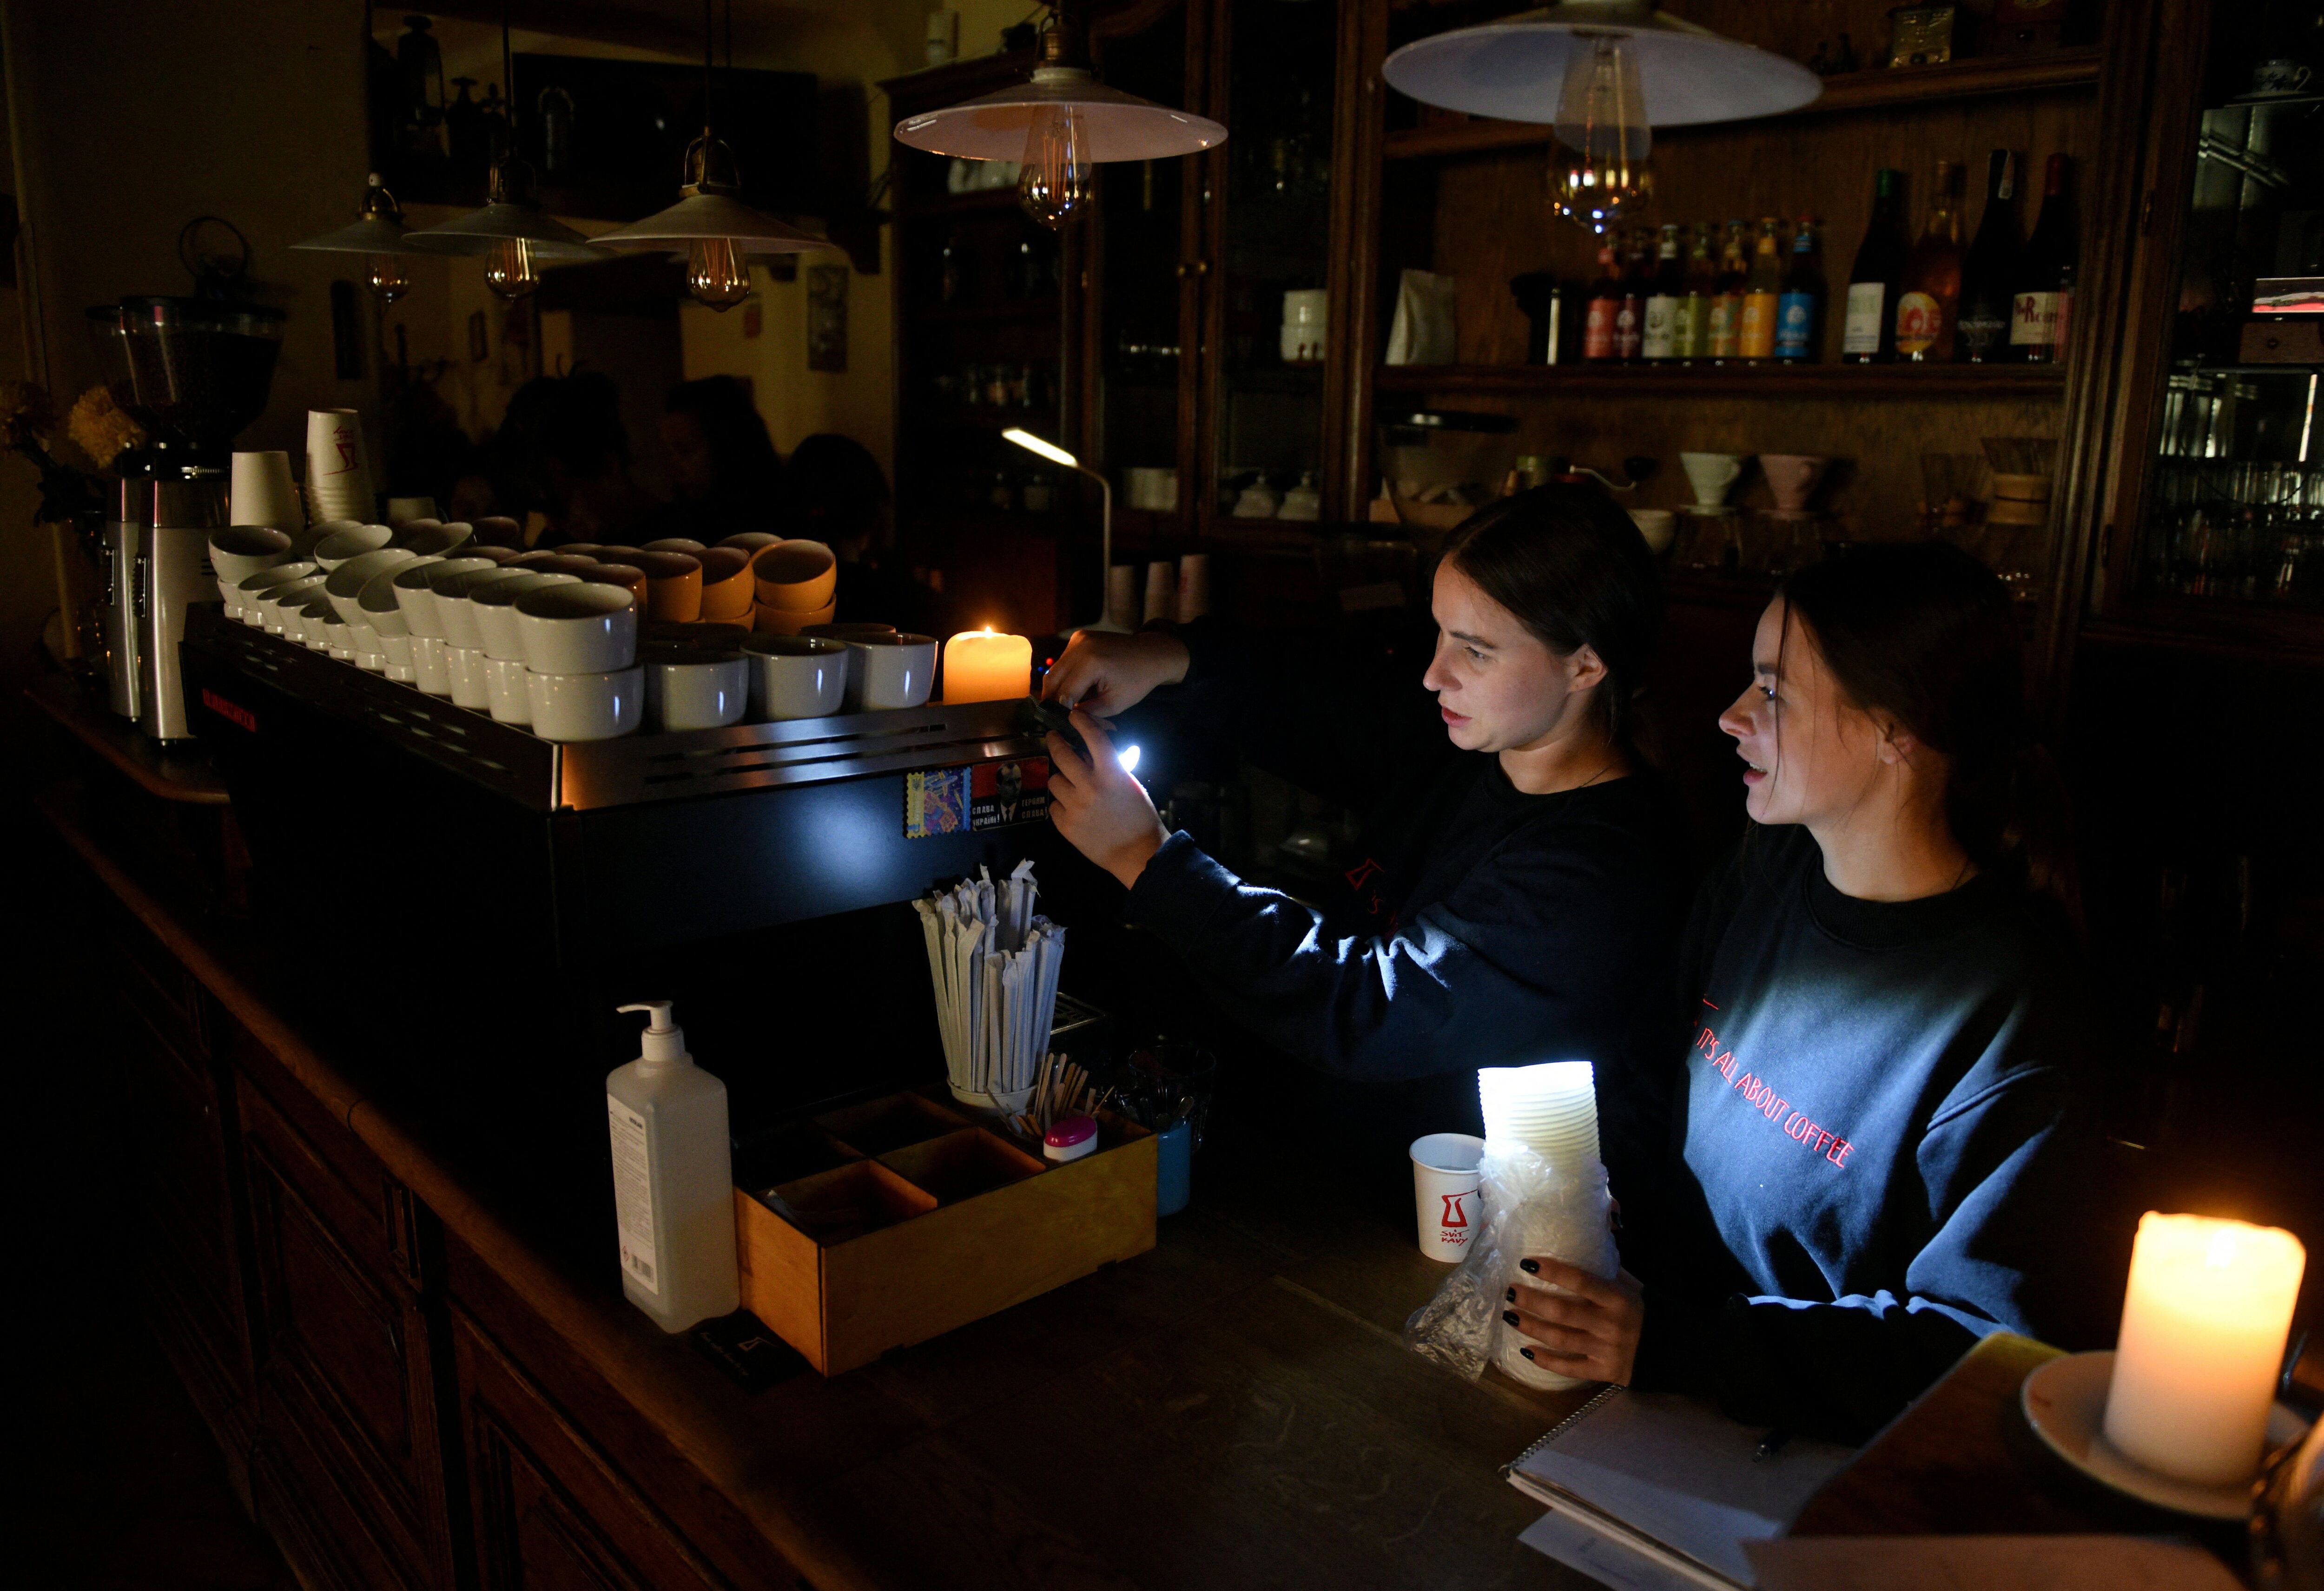 Employees prepare coffee at a cafe without electricity in the western Ukrainian city of Lviv after three Russian missiles fired at a power infrastructure on October 11, 2022. (Photo by Yuriy Dyachyshyn/AFP)